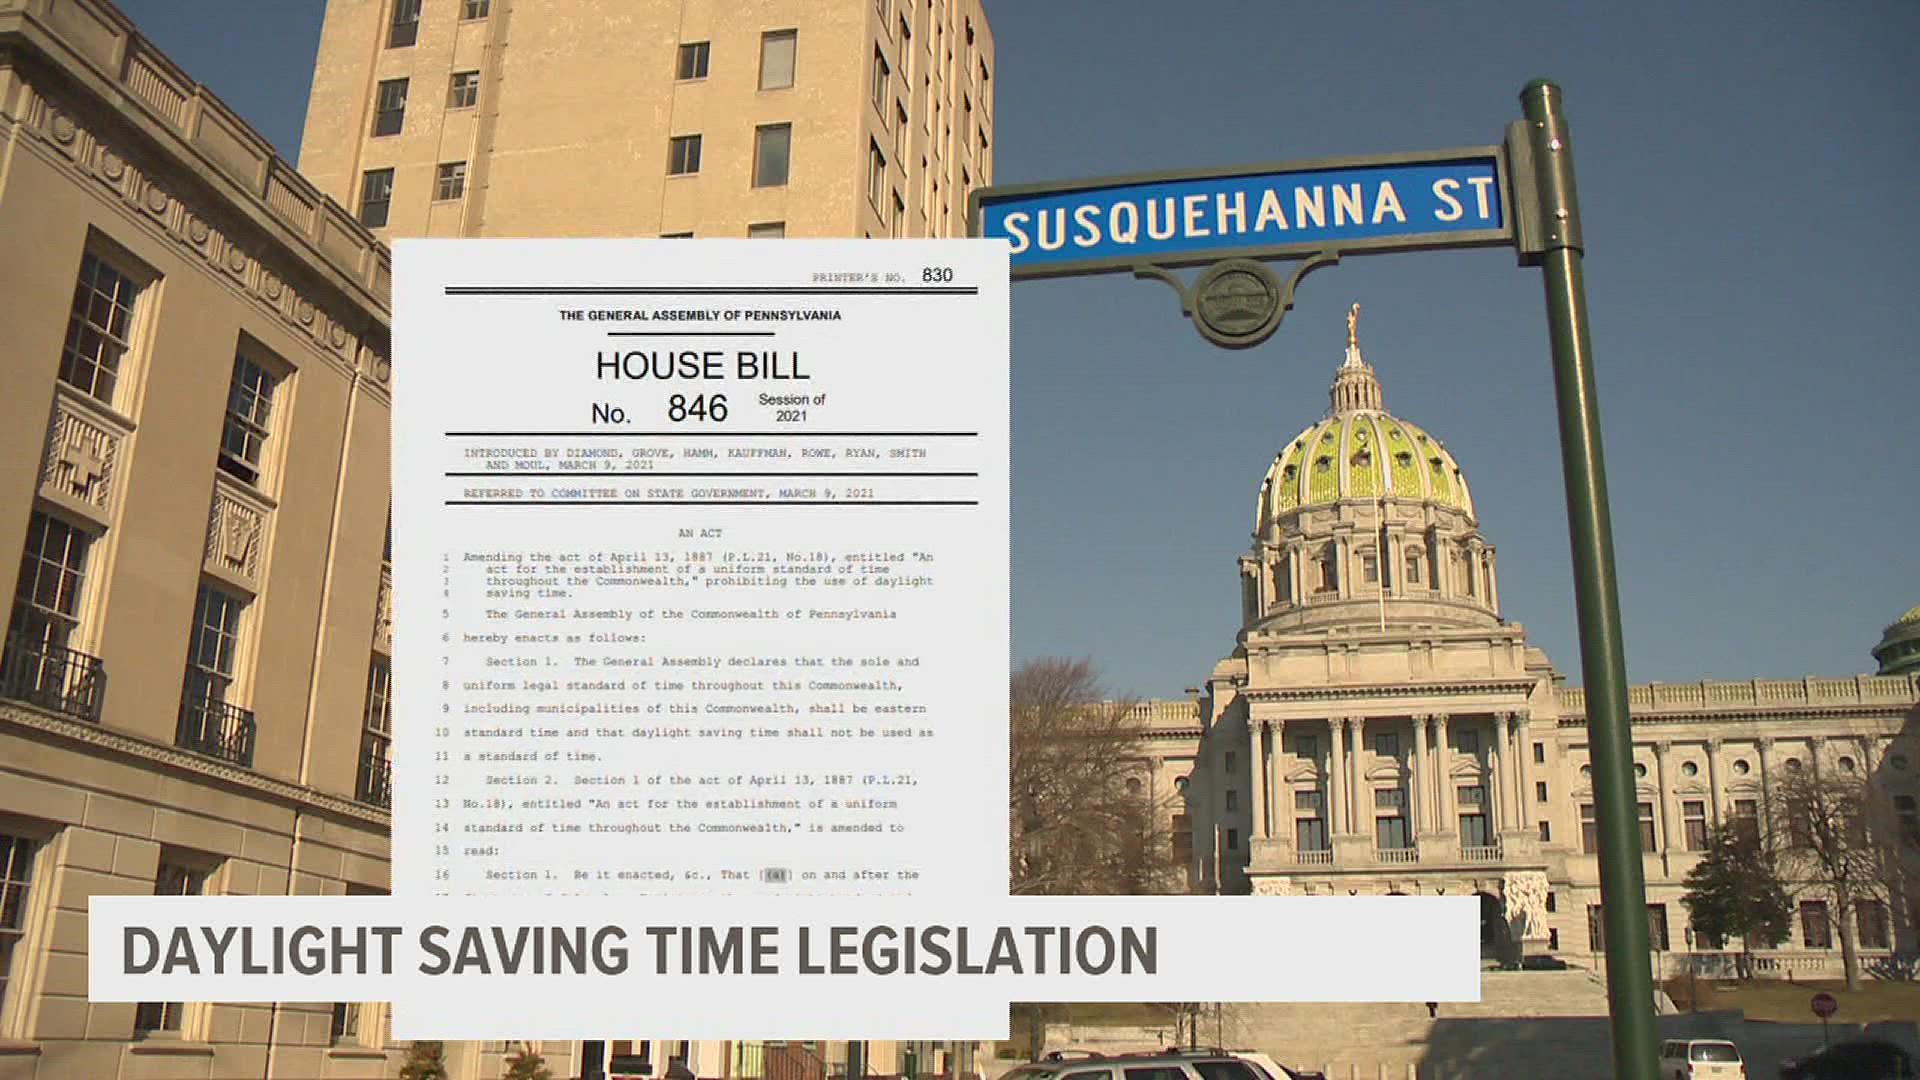 Lawmakers at the state and federal level have pushed forward bills that would end Daylight Saving Time, however, the legislative process has stalled.